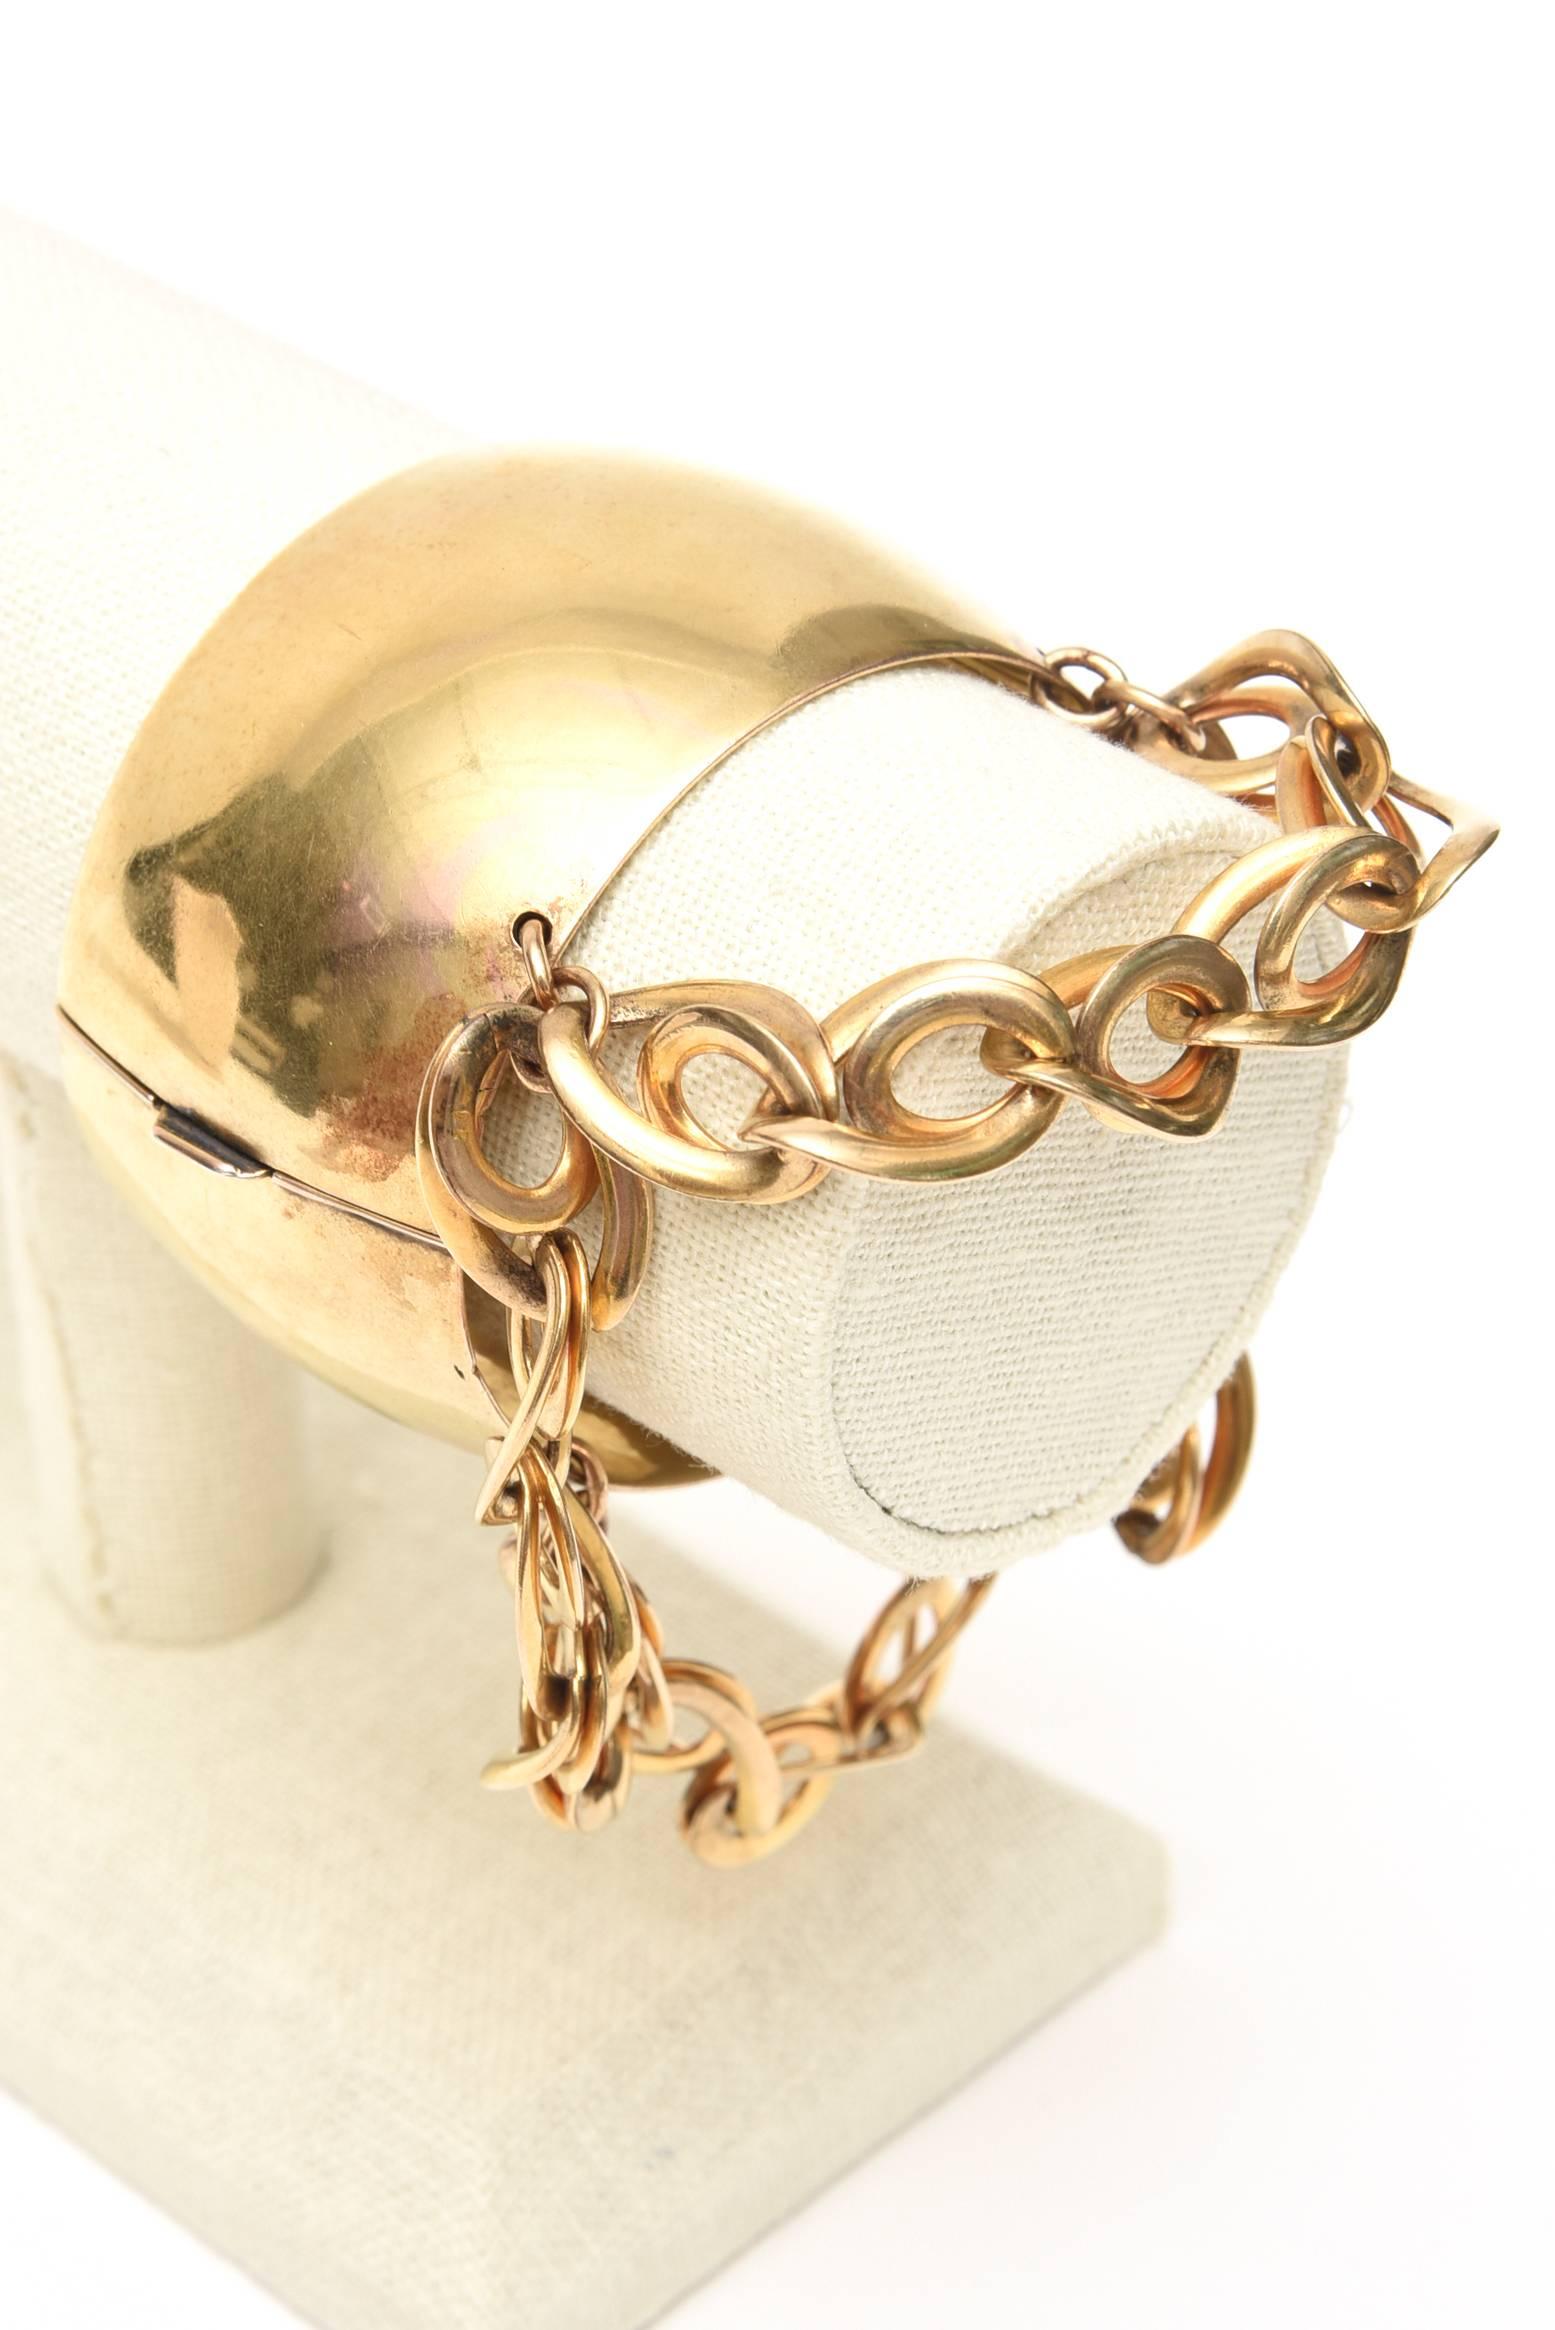 Gold Wash over Sterling Silver Cuff Bracelet with Dangling Link Chain /SALE 1